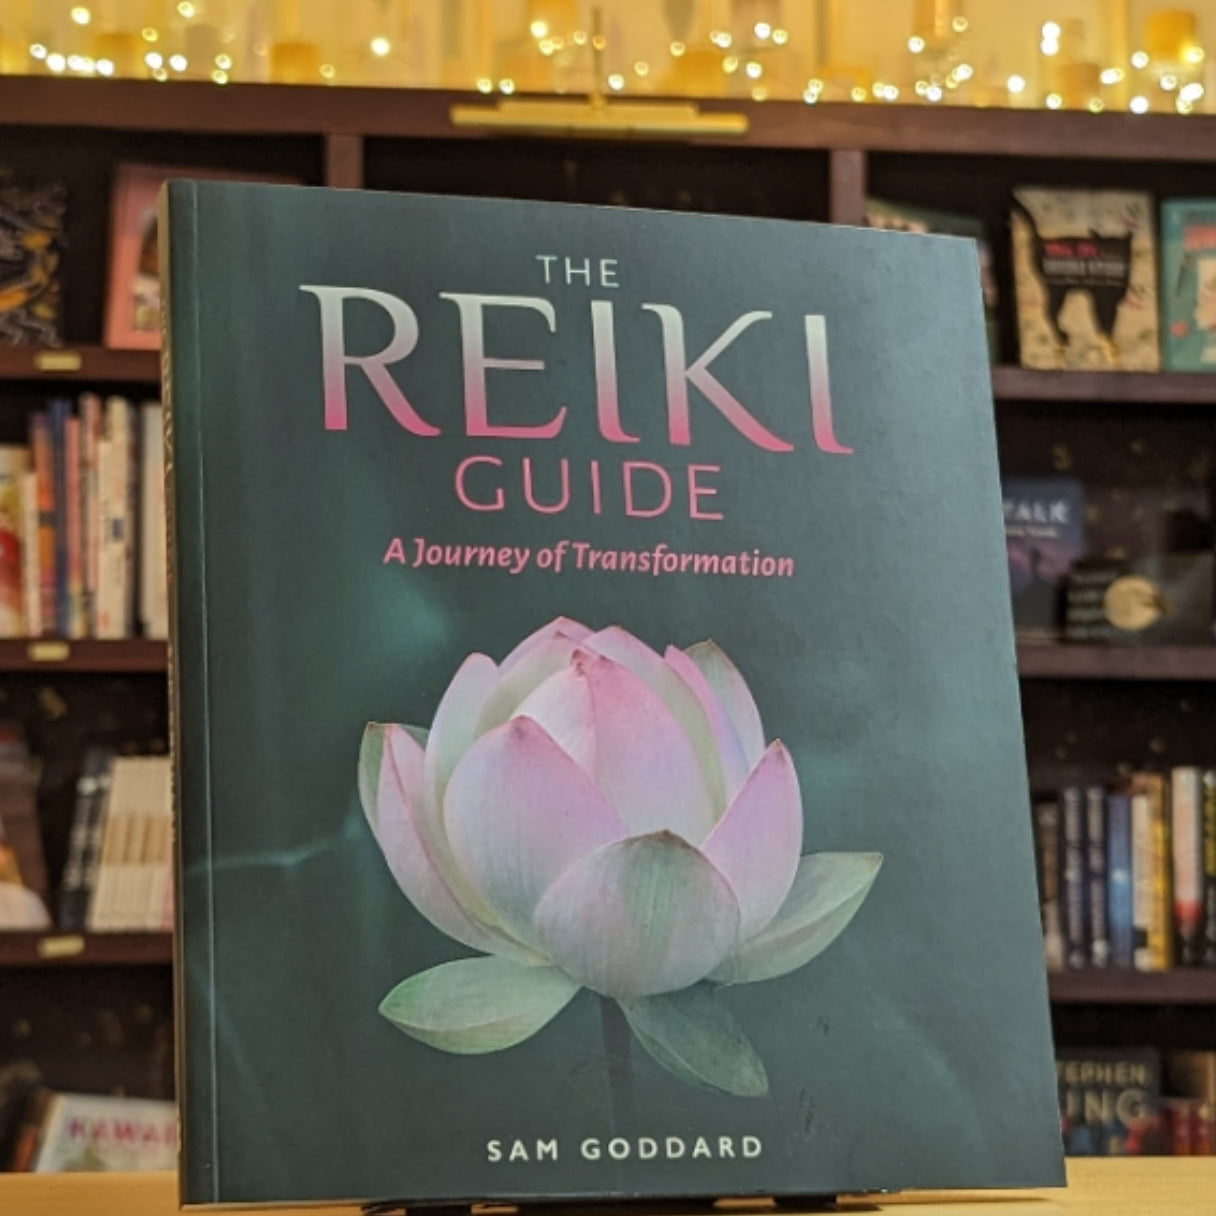 The Reiki Guide: A Journey of Transformation